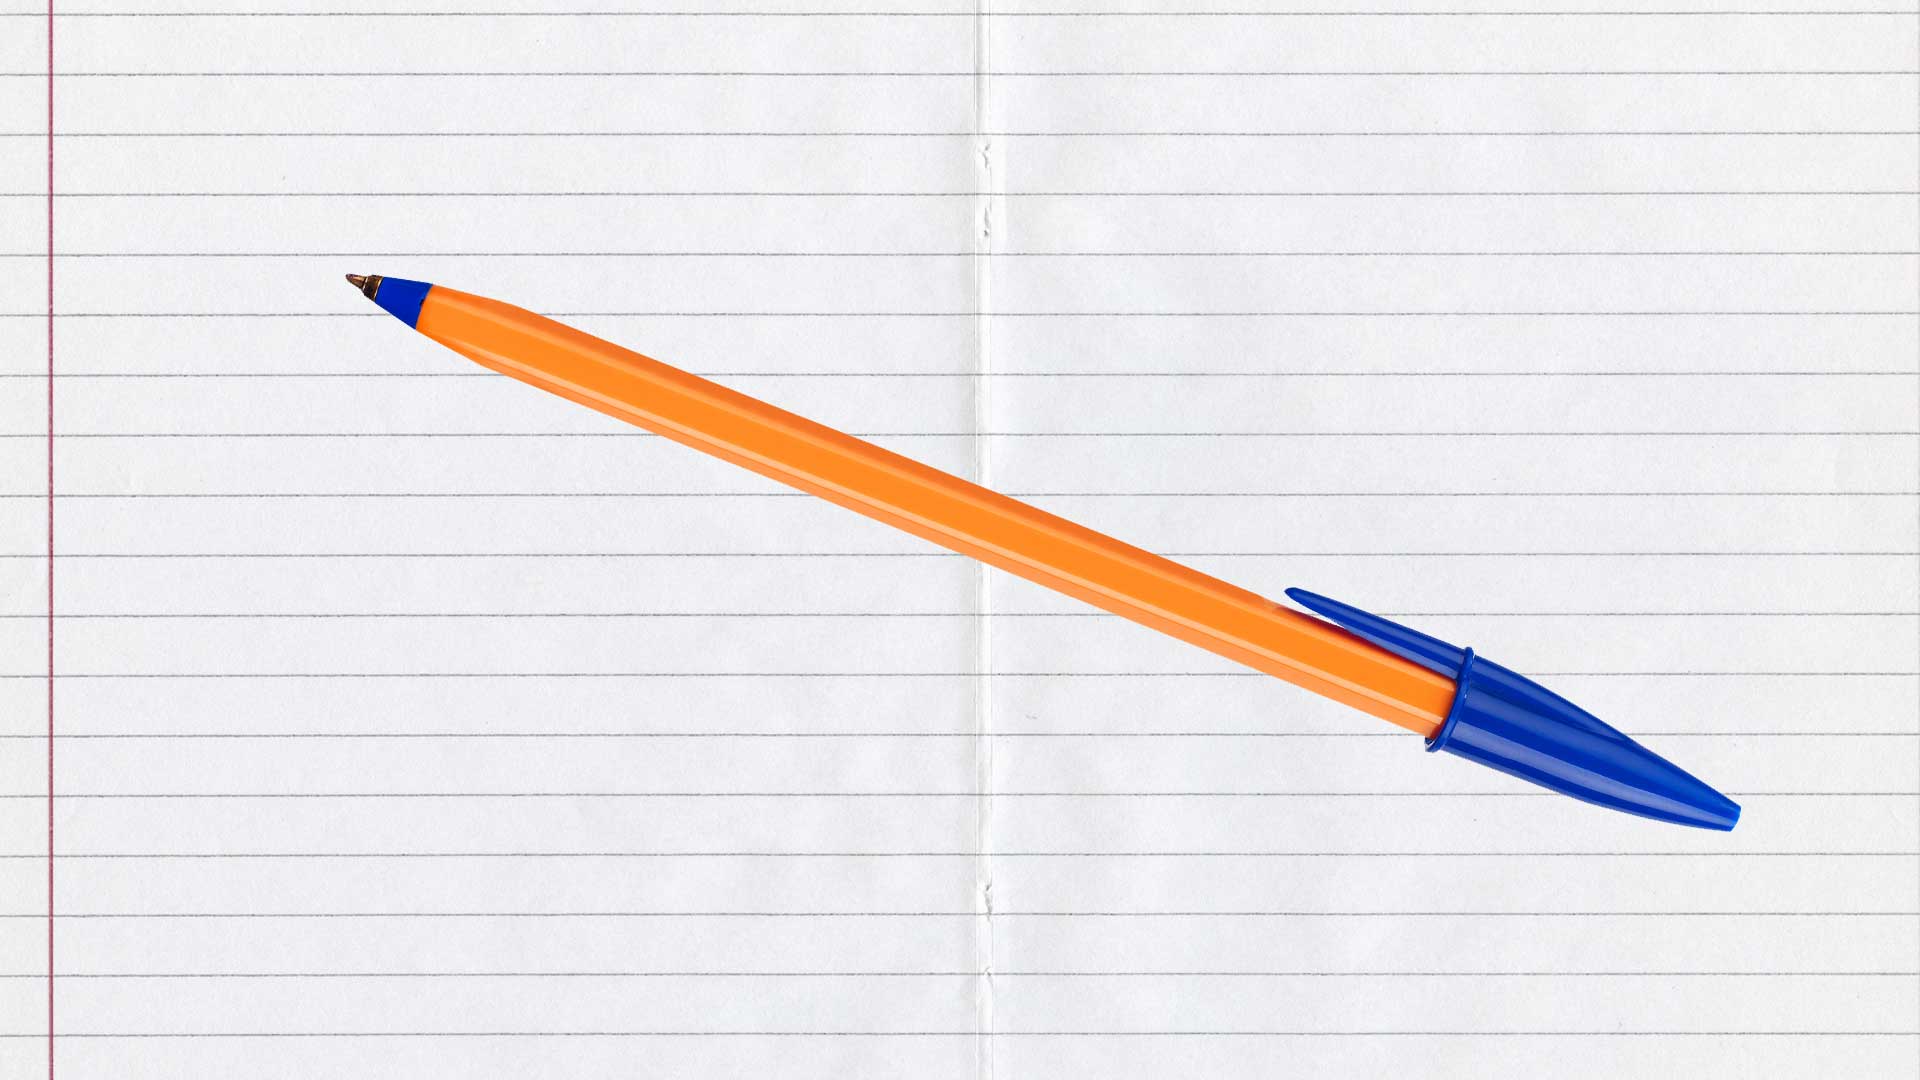 A ballpoint pen rests on a sheet of lined paper